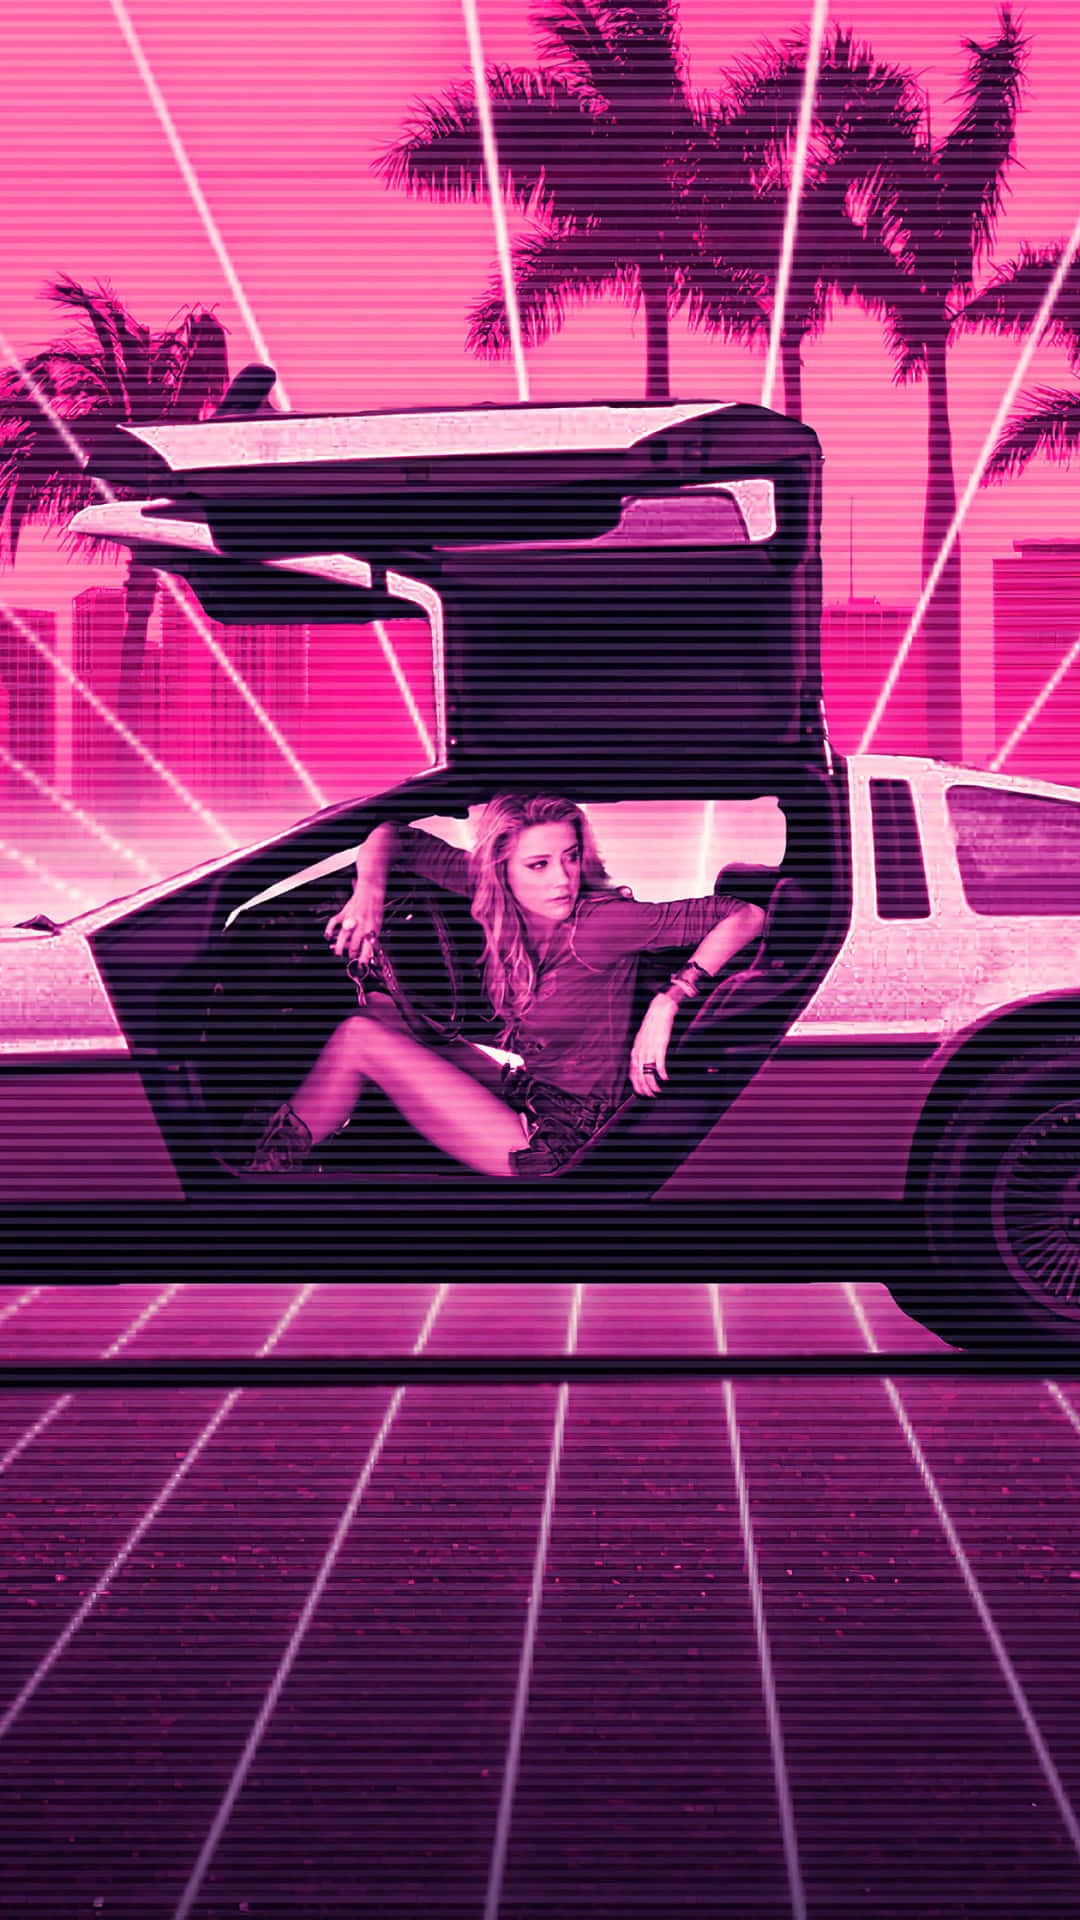 A Woman Is Sitting In A Pink Car With Palm Trees Wallpaper